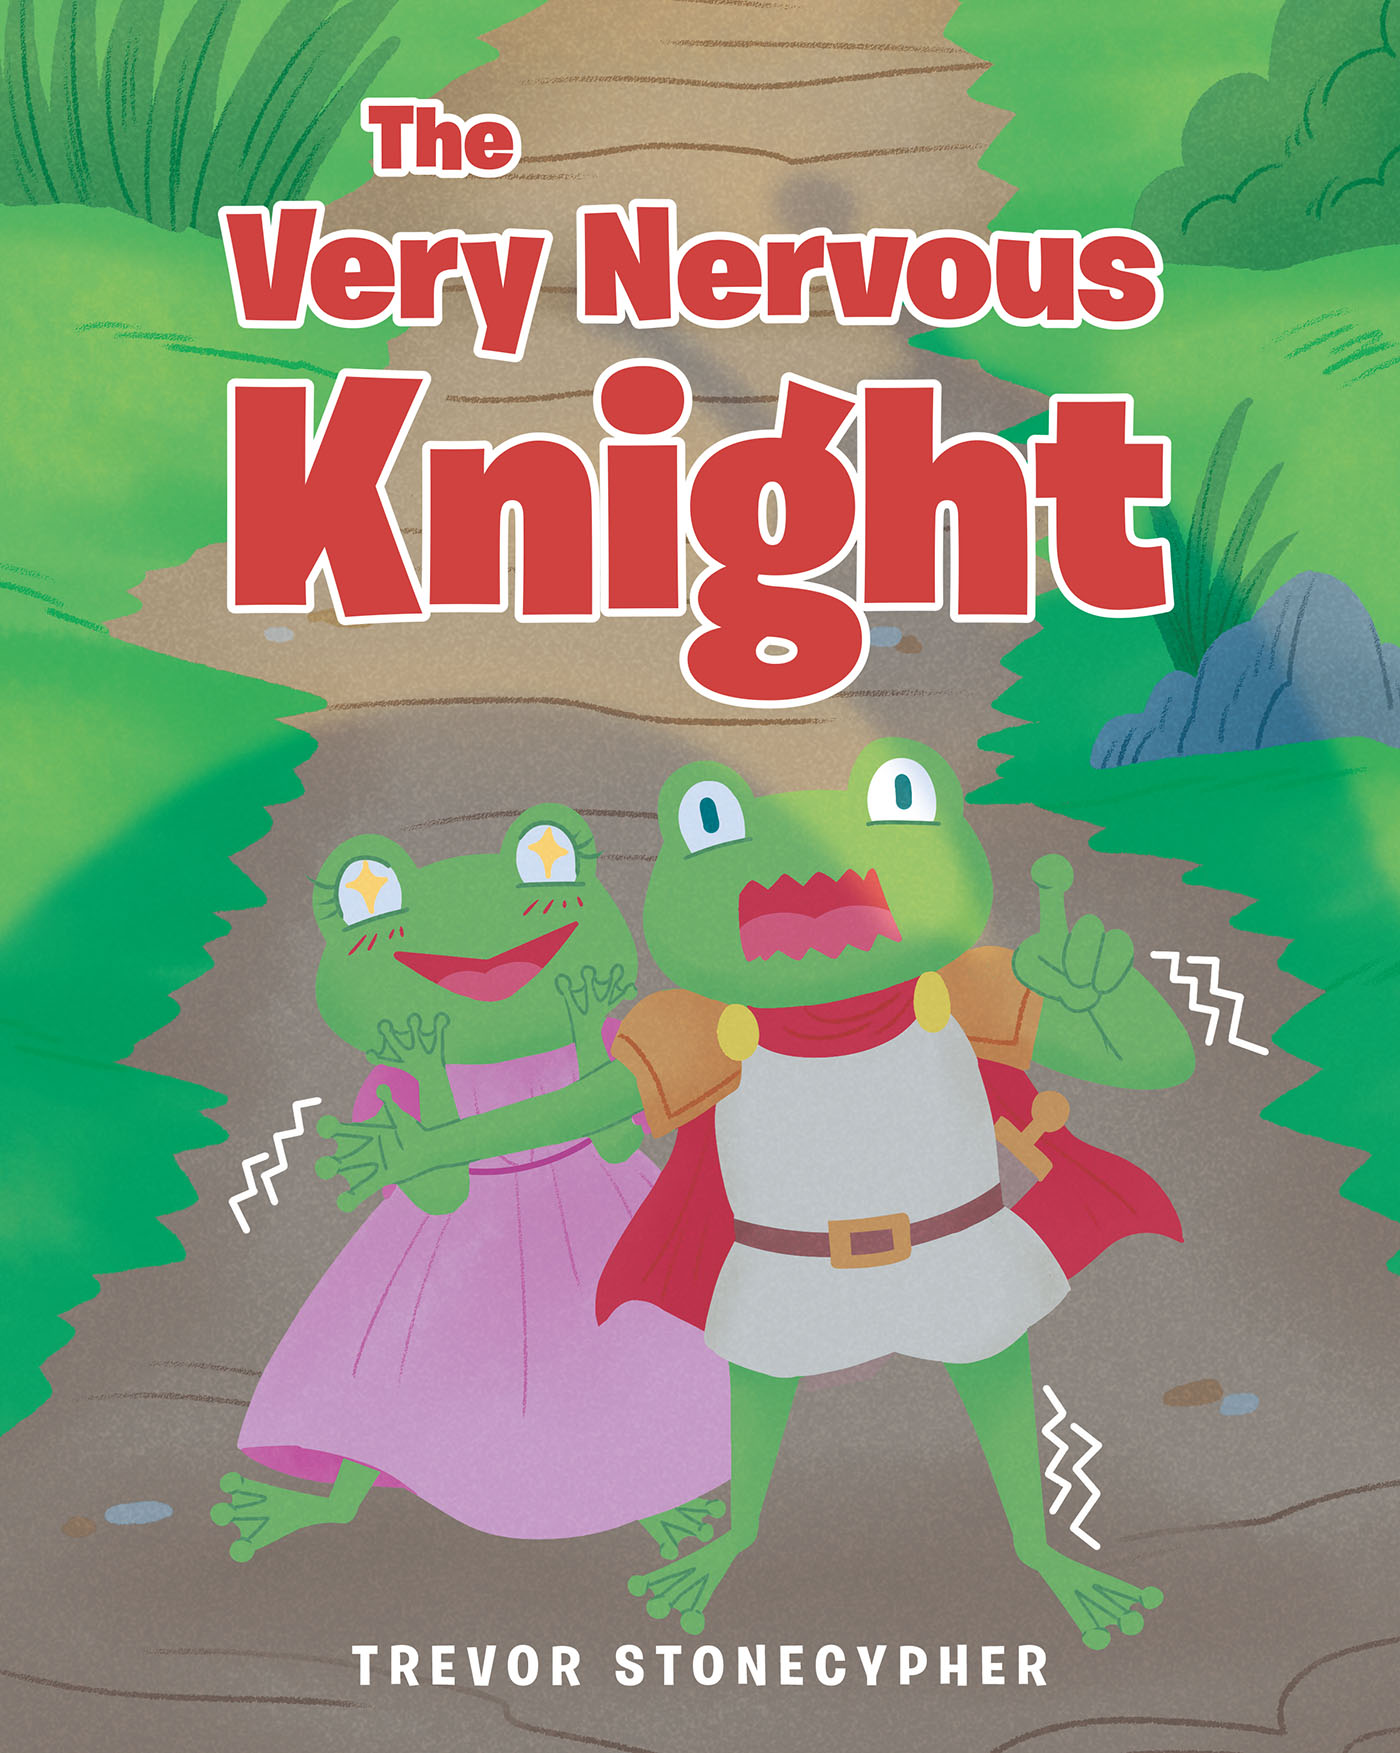 Trevor Stonecypher’s Newly Released "The Very Nervous Knight" is a Charming Tale of an Unexpected Lesson of Acceptance and Trust